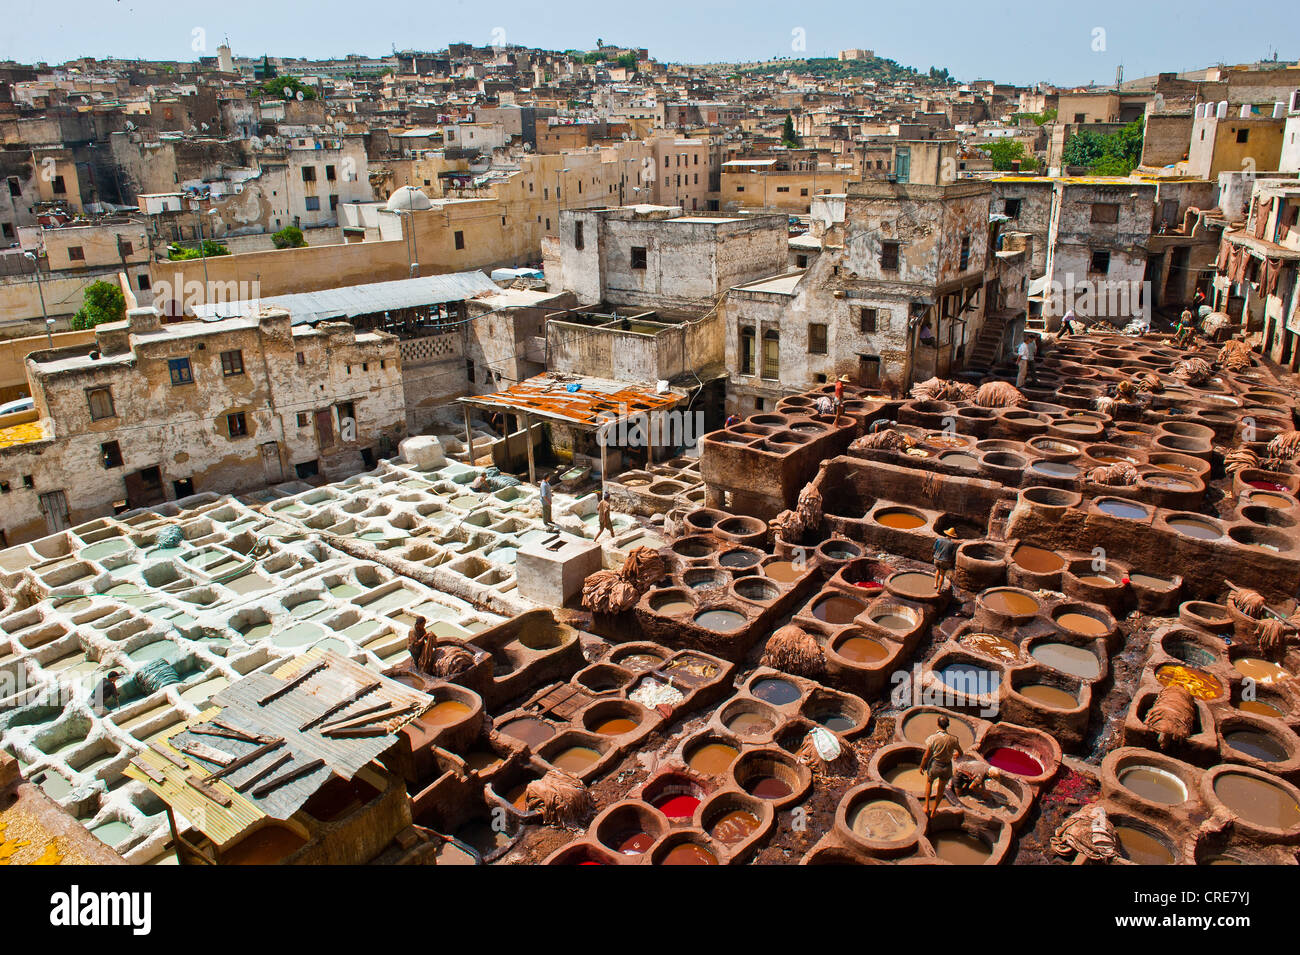 Traditional tannery with tanning and dyeing pits, historic town centre or Medina, UNESCO World Heritage Site, Fez, Morocco Stock Photo